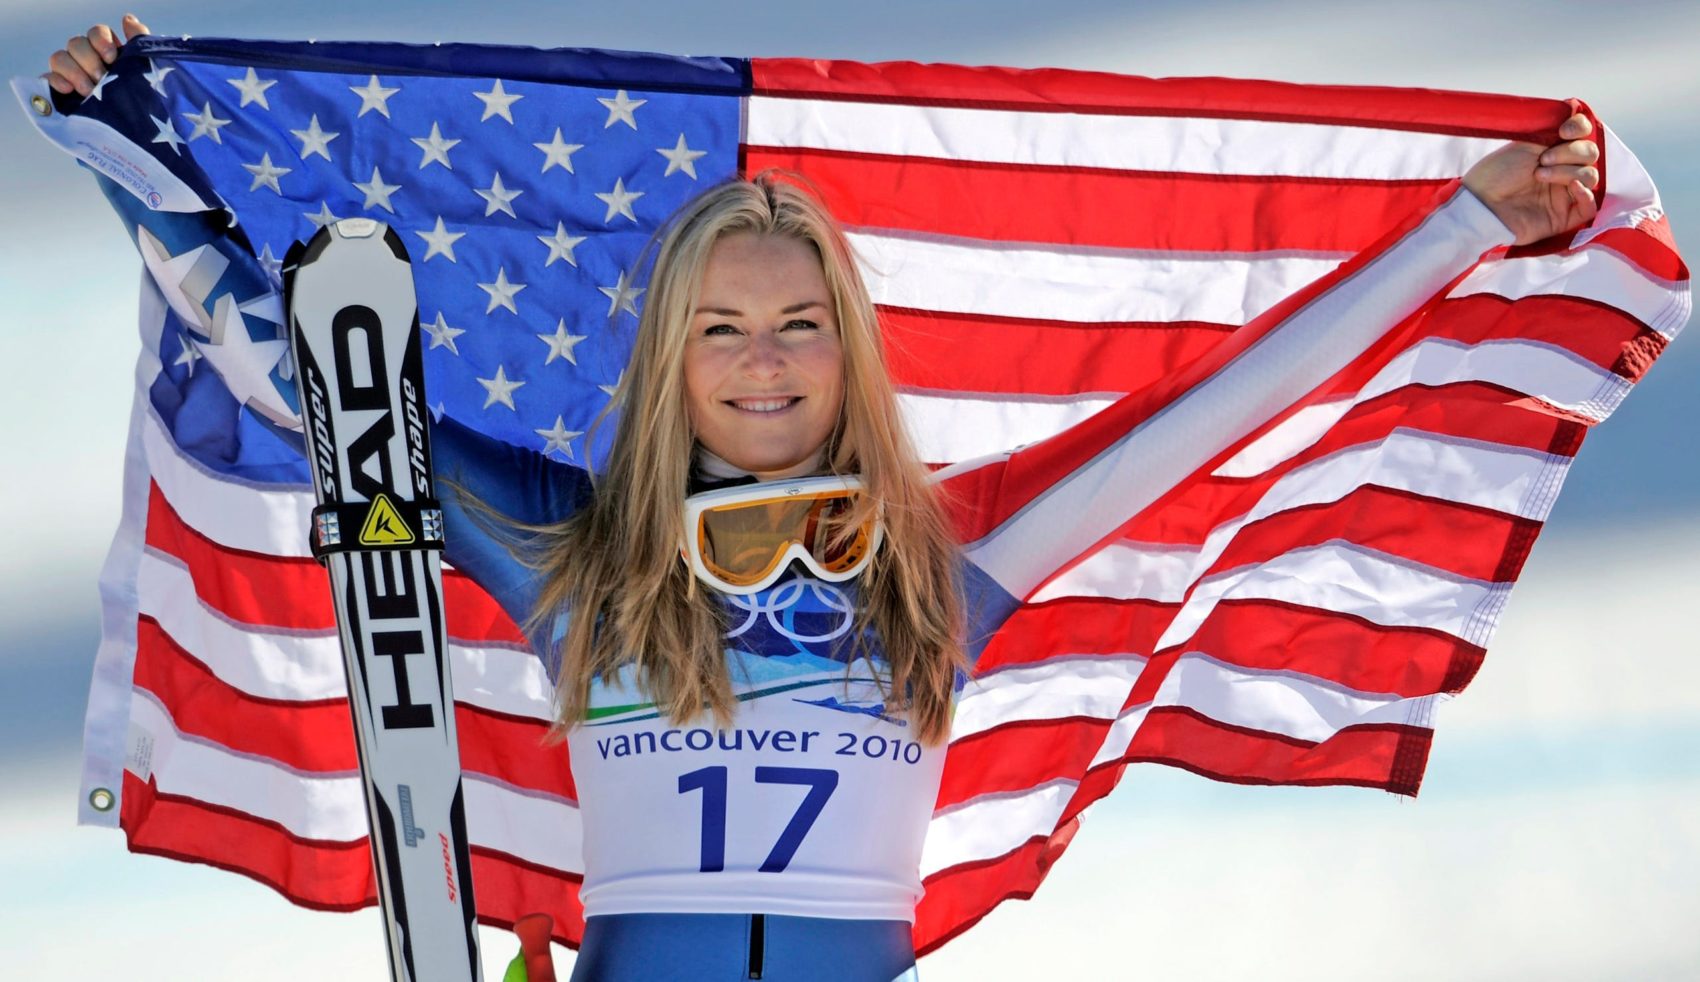 Lindsey Vonn took home three Olympic medals over her career.